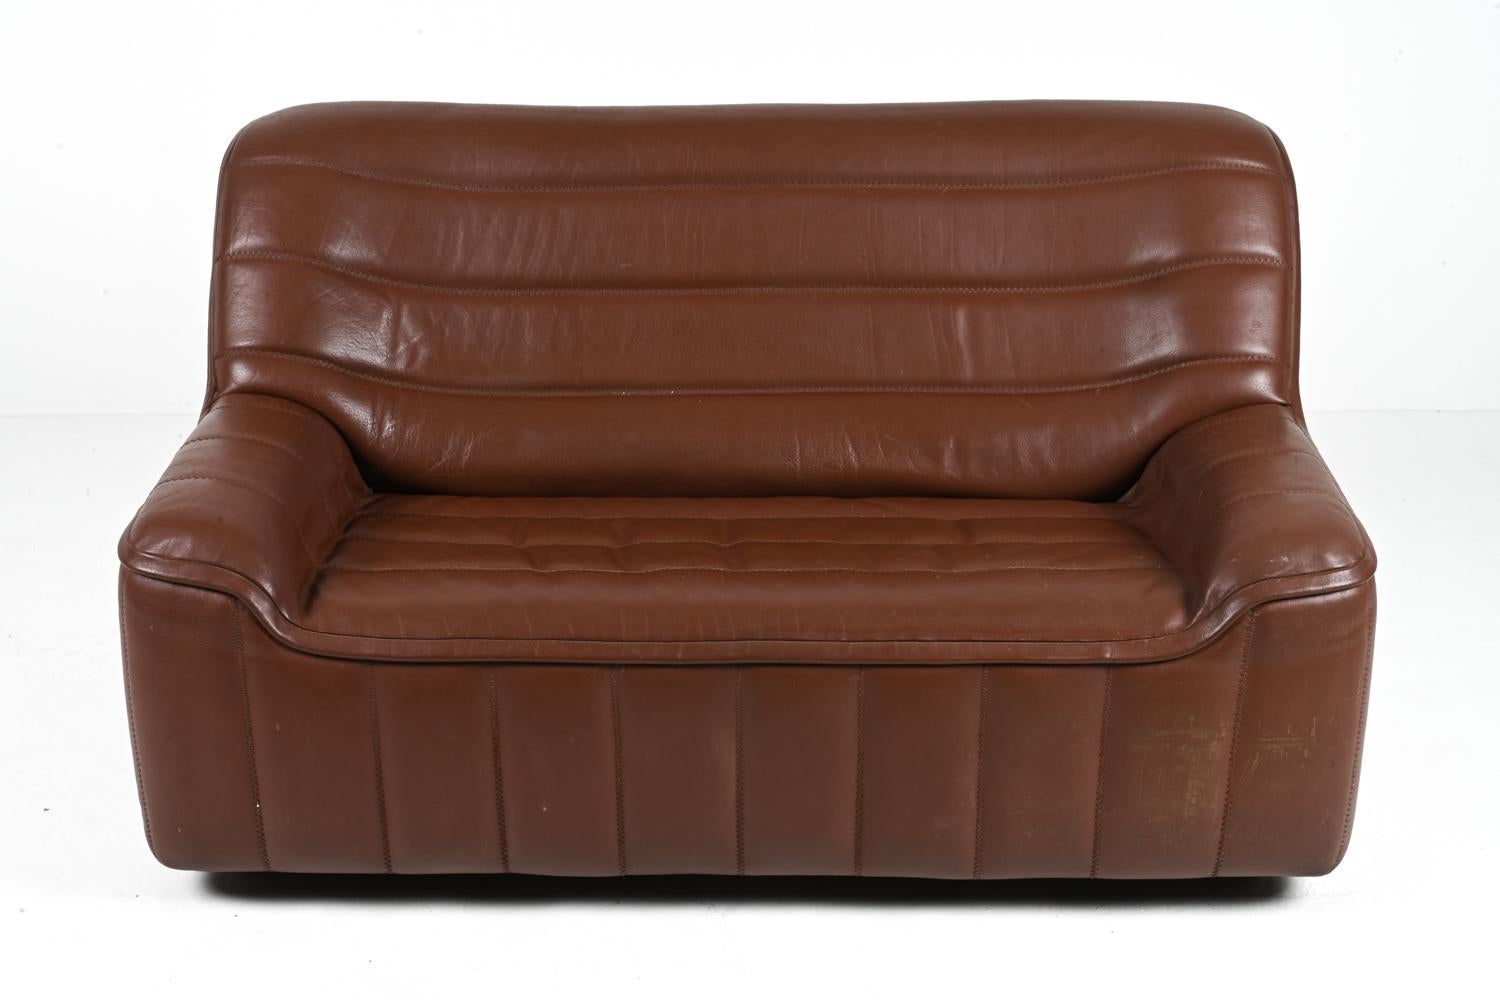 De Sede DS-84 Leather Two-Seat Sofa, c. 1970's In Good Condition For Sale In Norwalk, CT